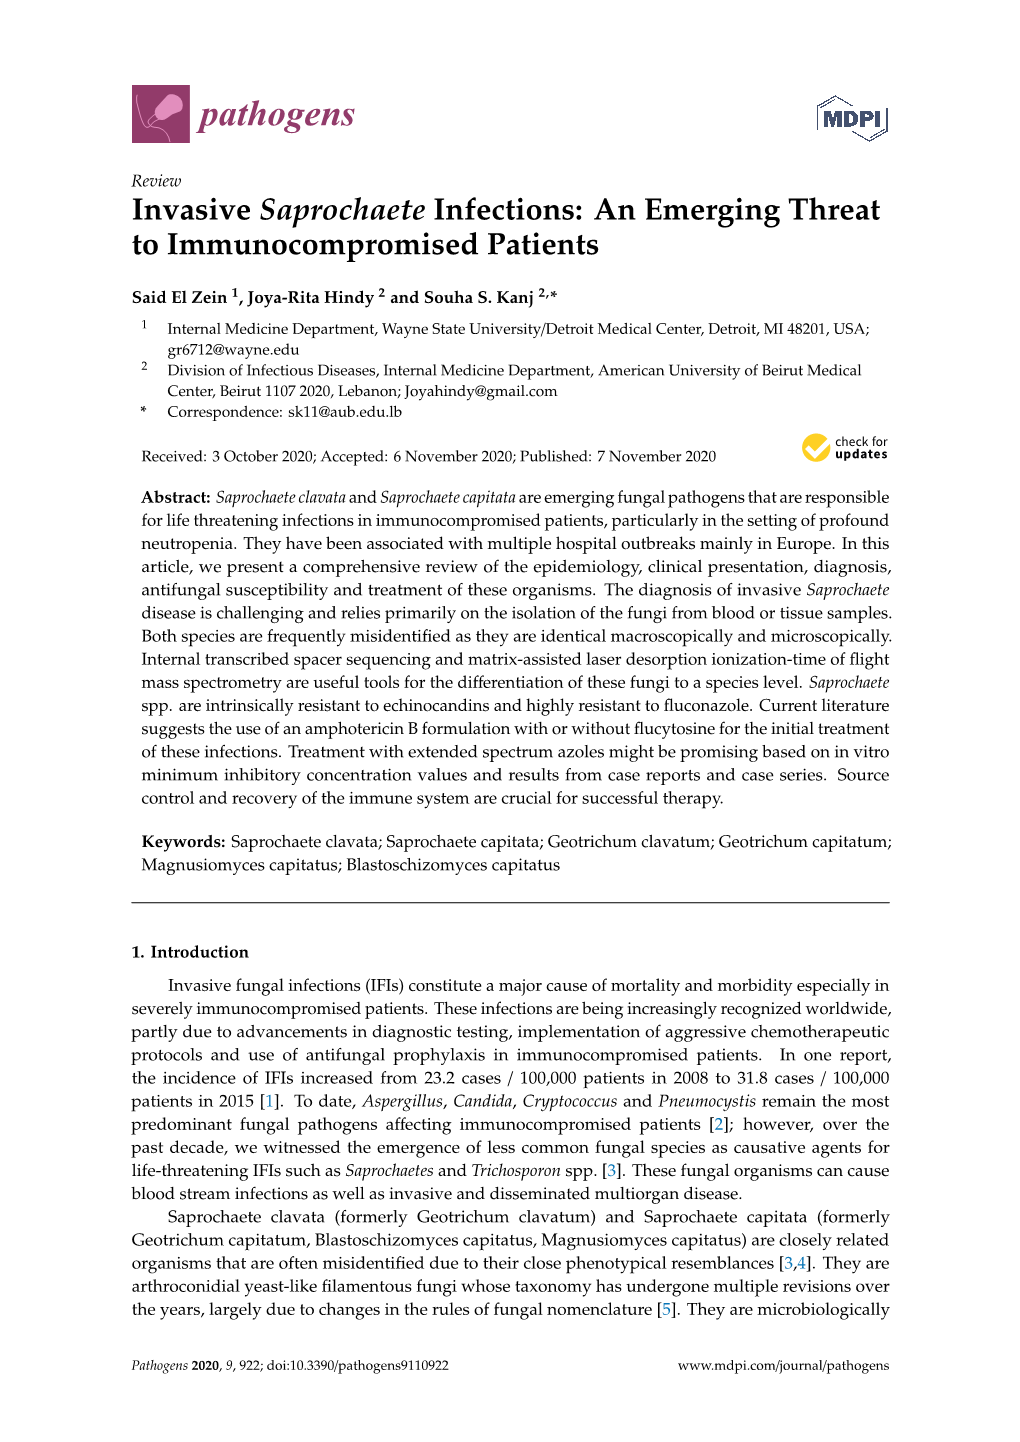 Invasive Saprochaete Infections: an Emerging Threat to Immunocompromised Patients